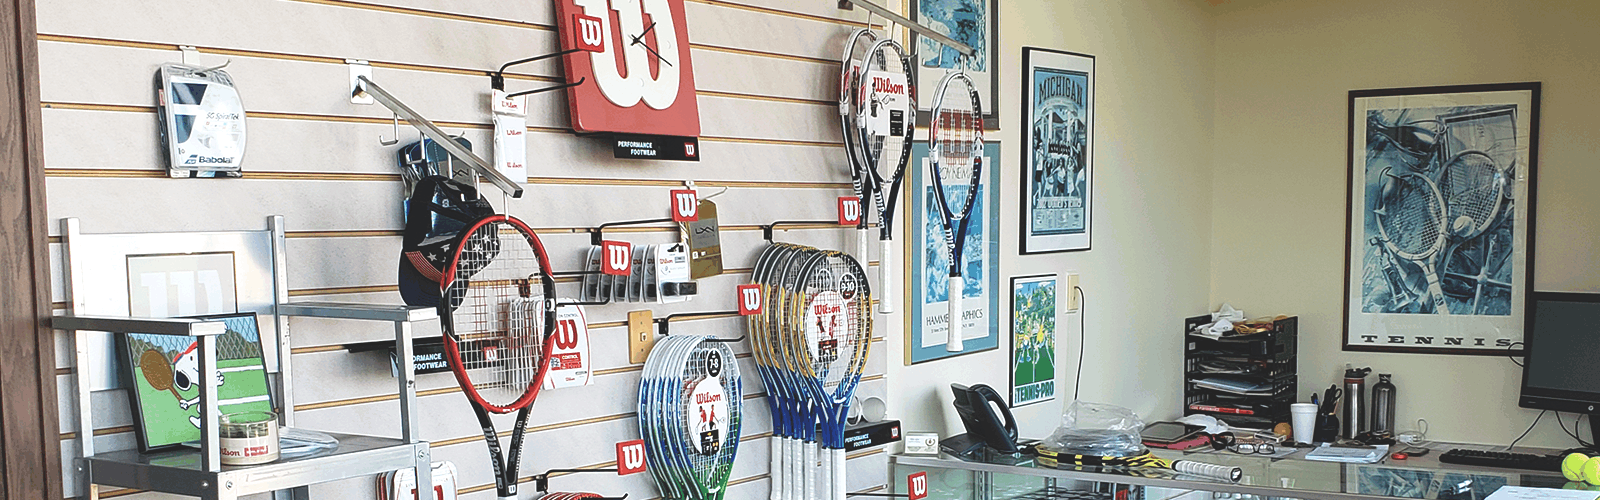 0720_-_Tennis_Pro_Shop_Counter_and_Wall_for_Web_-_DH